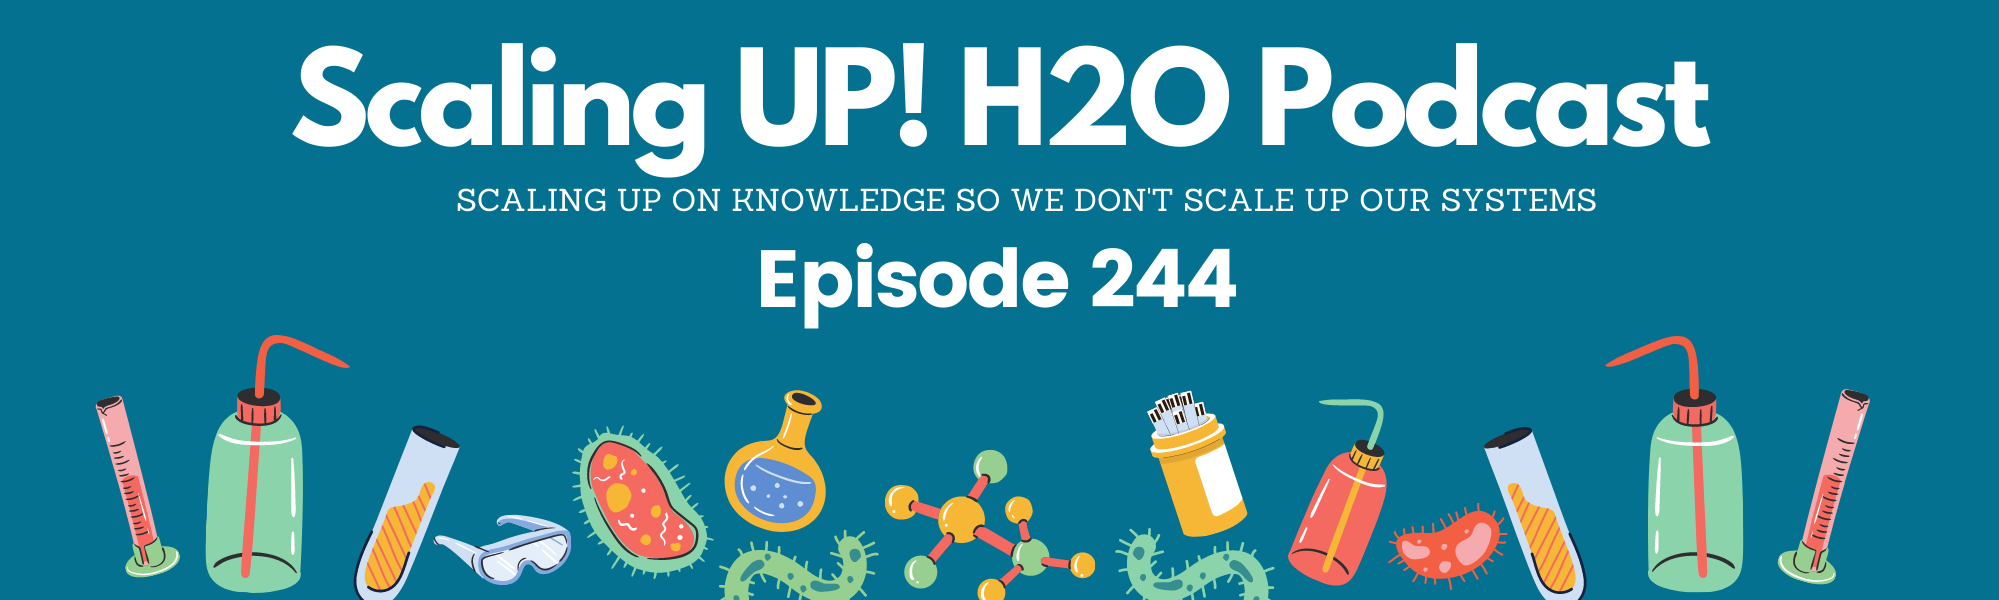 244 The One About Water Treaters For Clean Water - Scaling UP! H2O